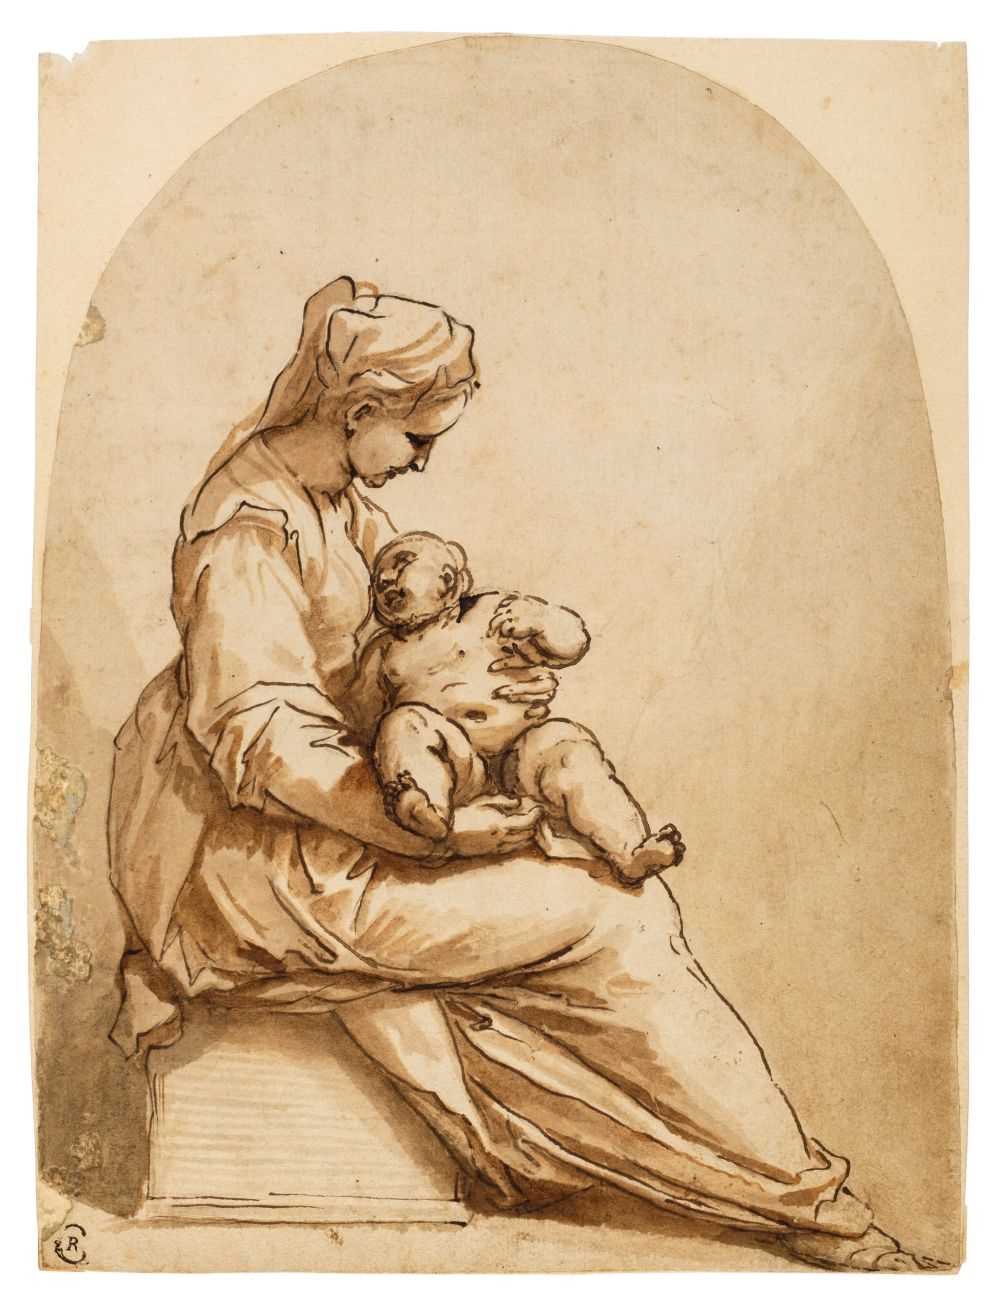 Lot 350 - Attributed to Pier Francesco Mola (1612-1666). Woman and child  seated on a stone